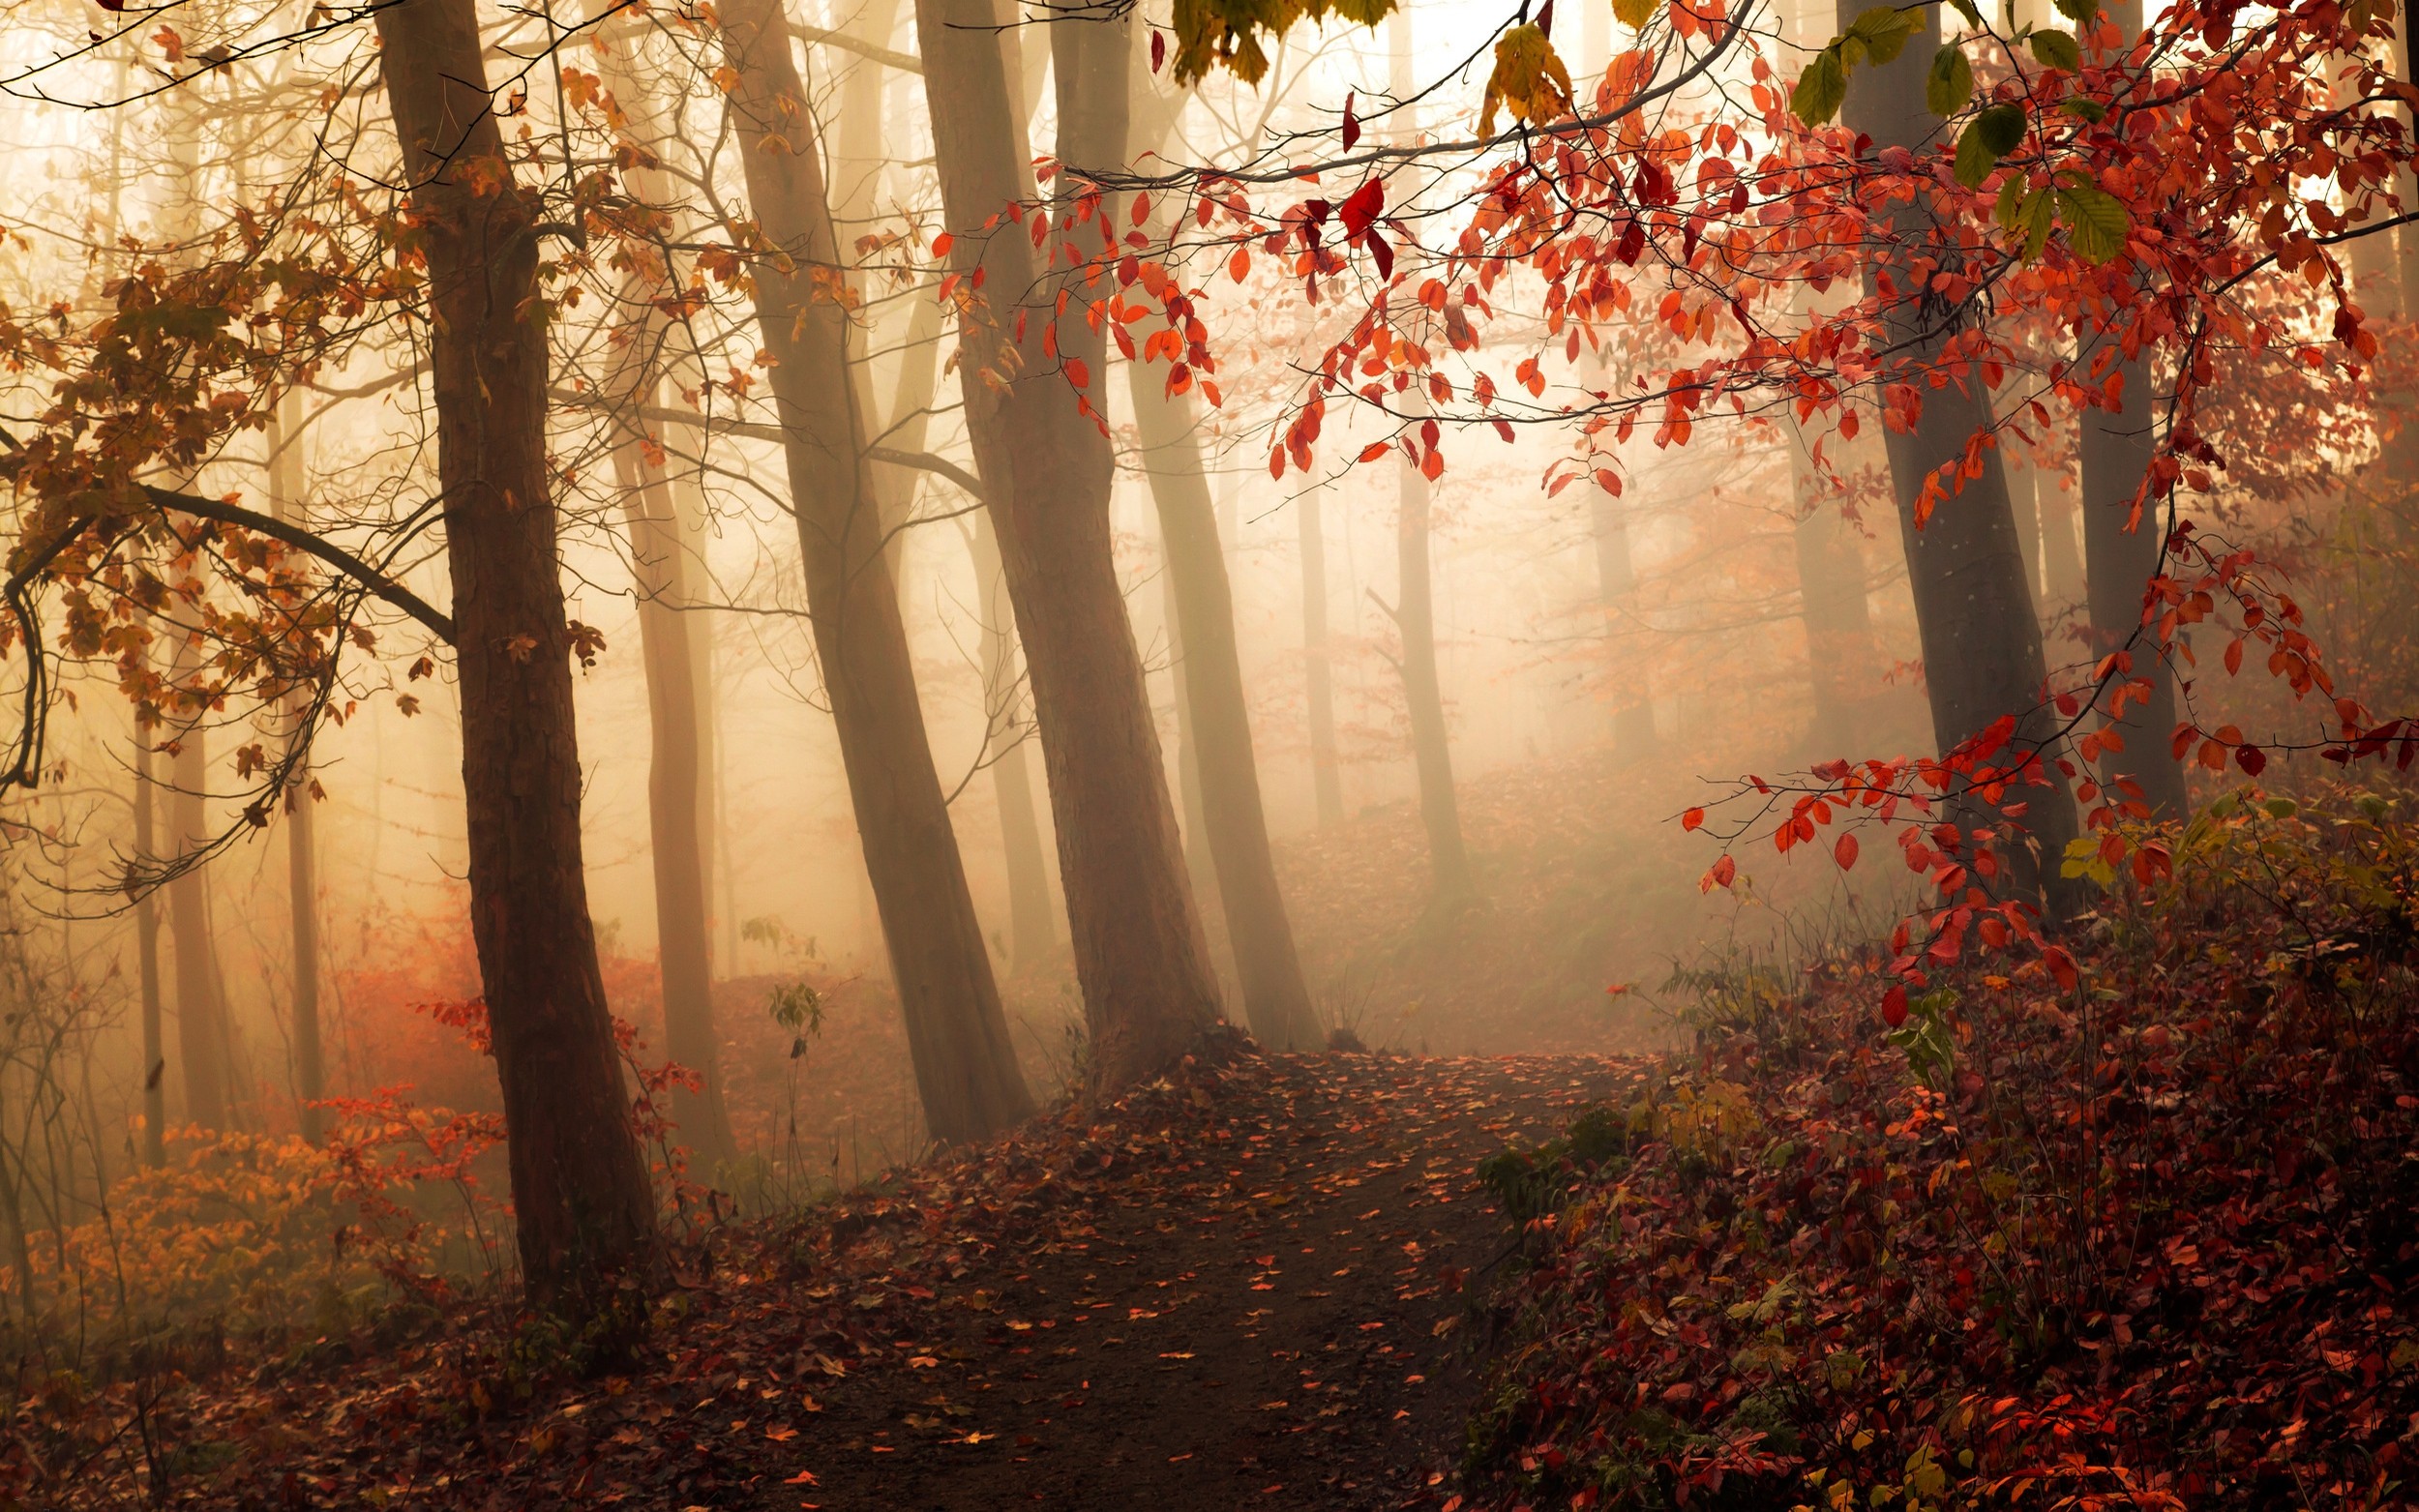 General 2500x1563 nature mist forest fall path morning trees leaves sunlight hills shrubs red orange